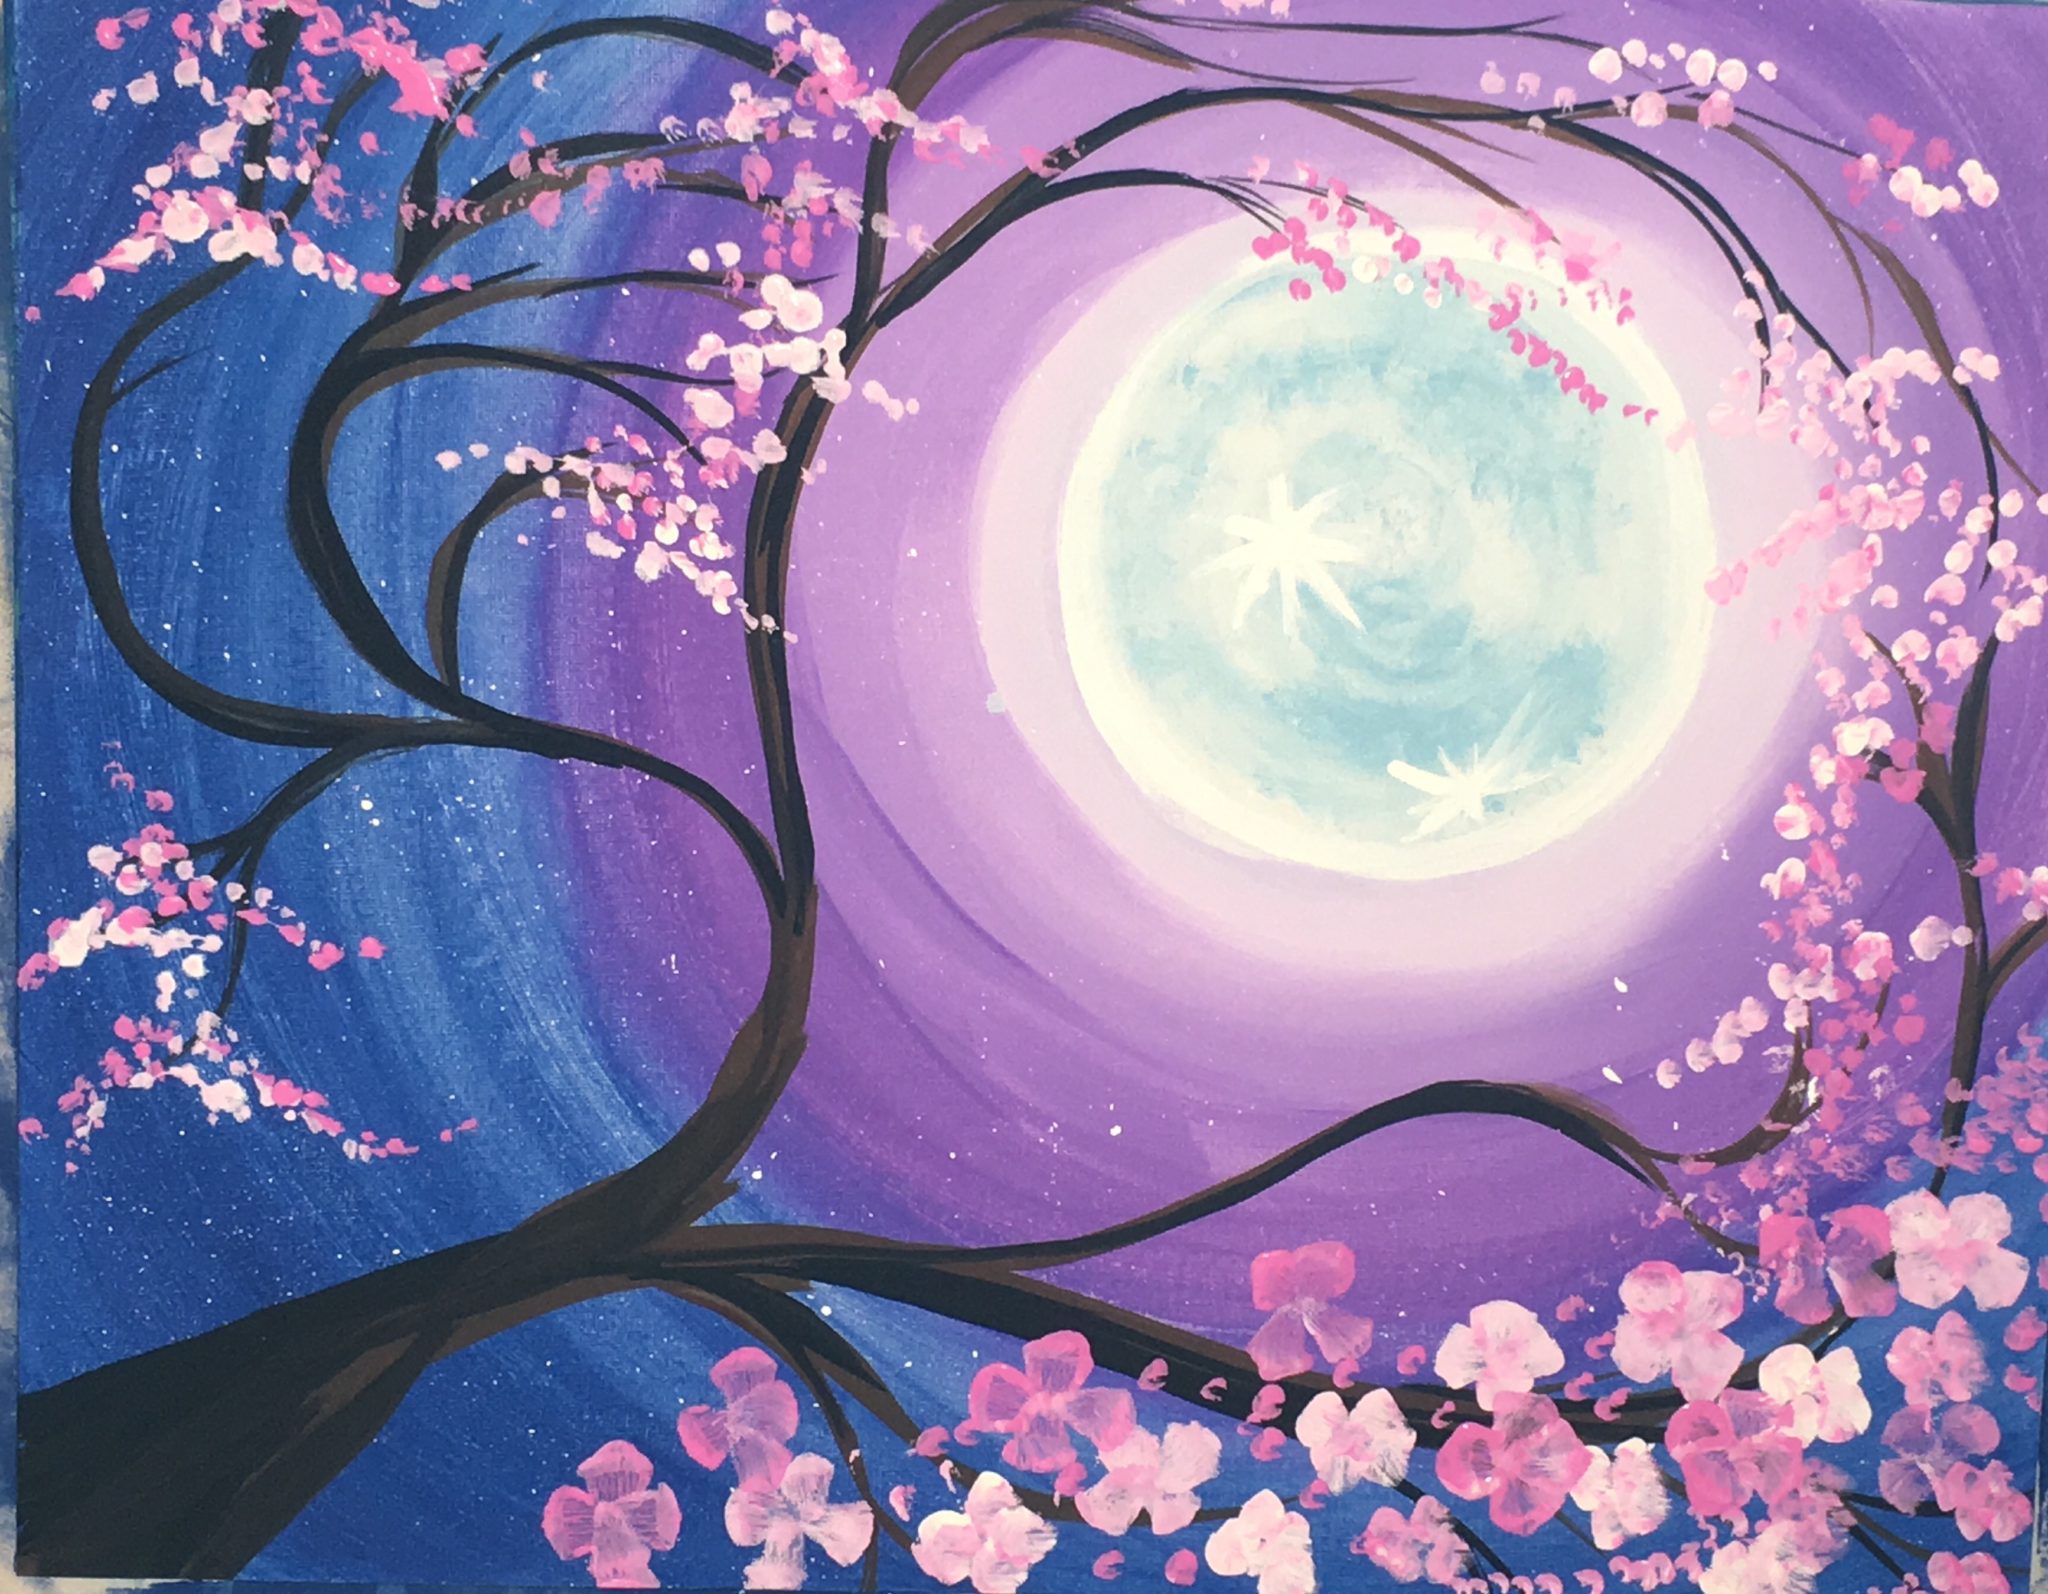 How To Paint A Cherry Blossom Tree With Moon - Step By Step Painting